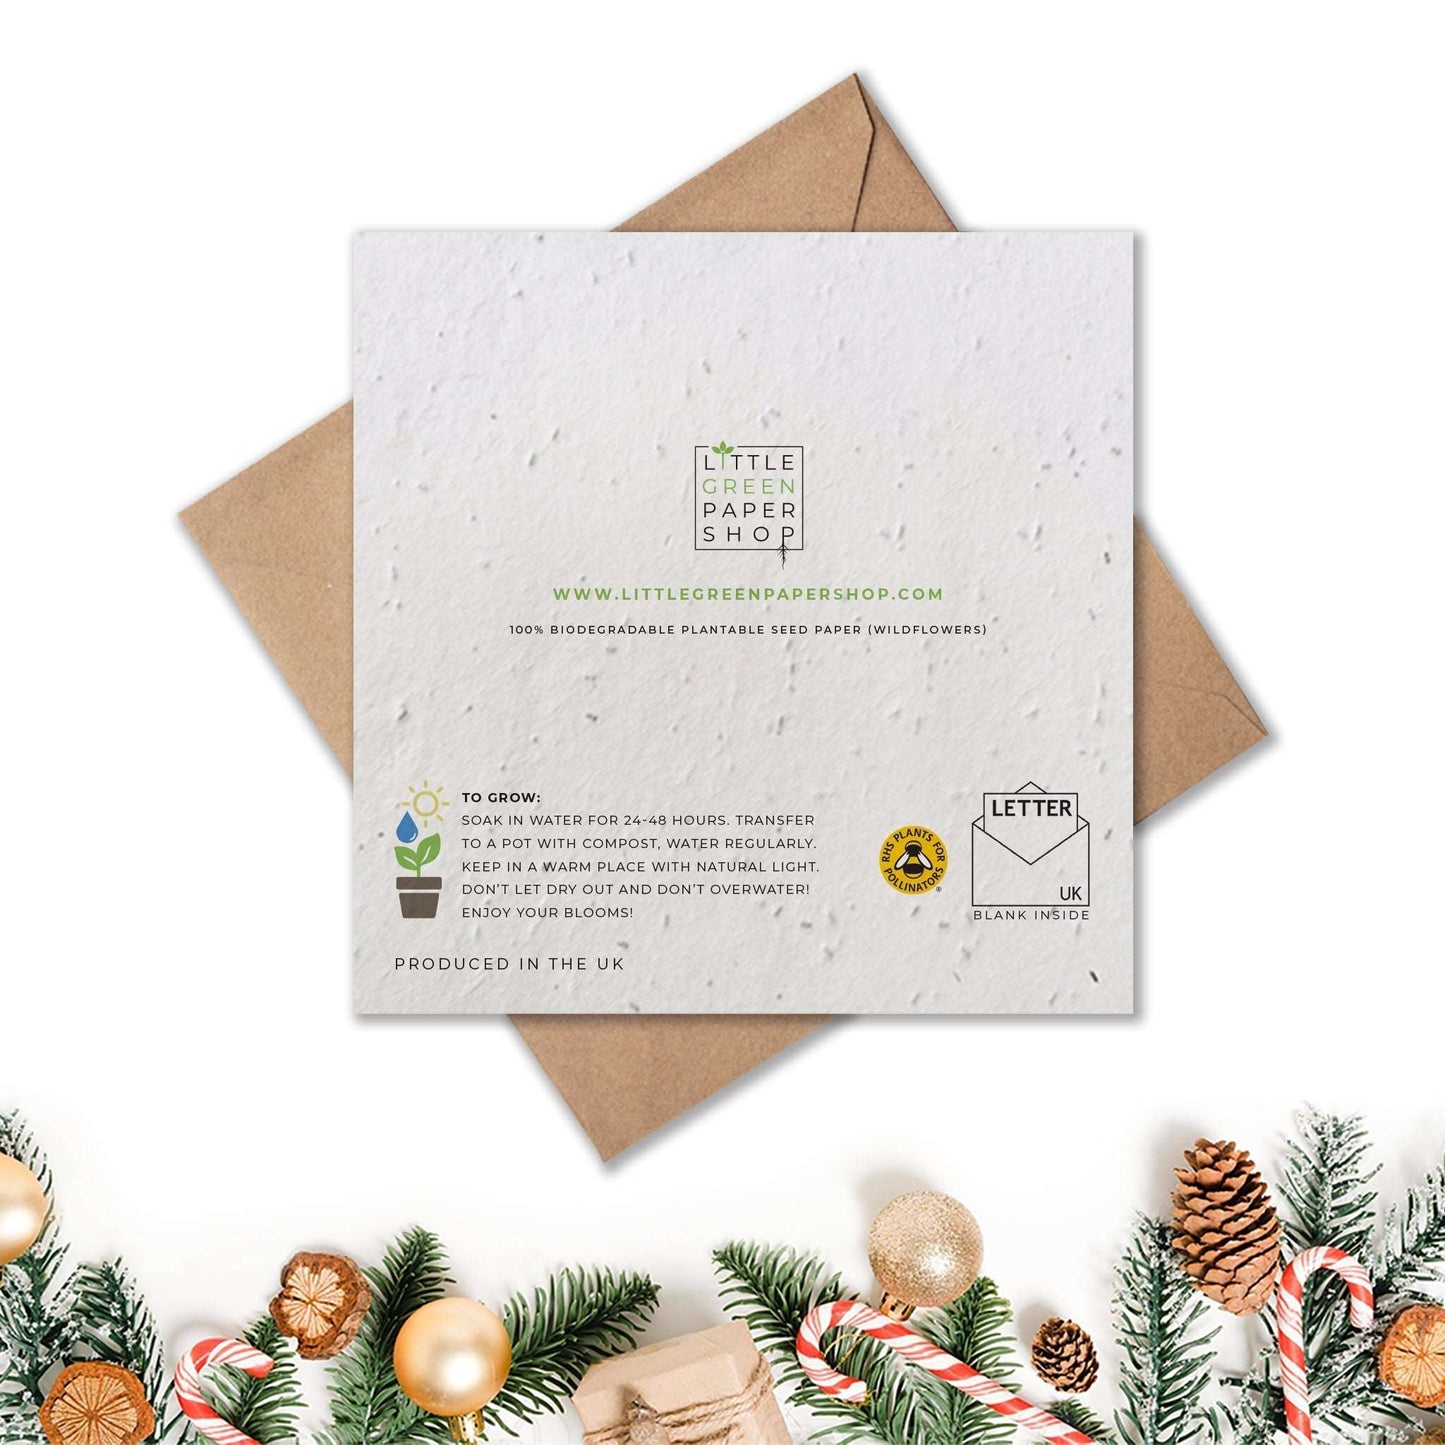 Plantable Seed Paper Christmas Card - Mistletoe Greeting Card Little Green Paper Shop